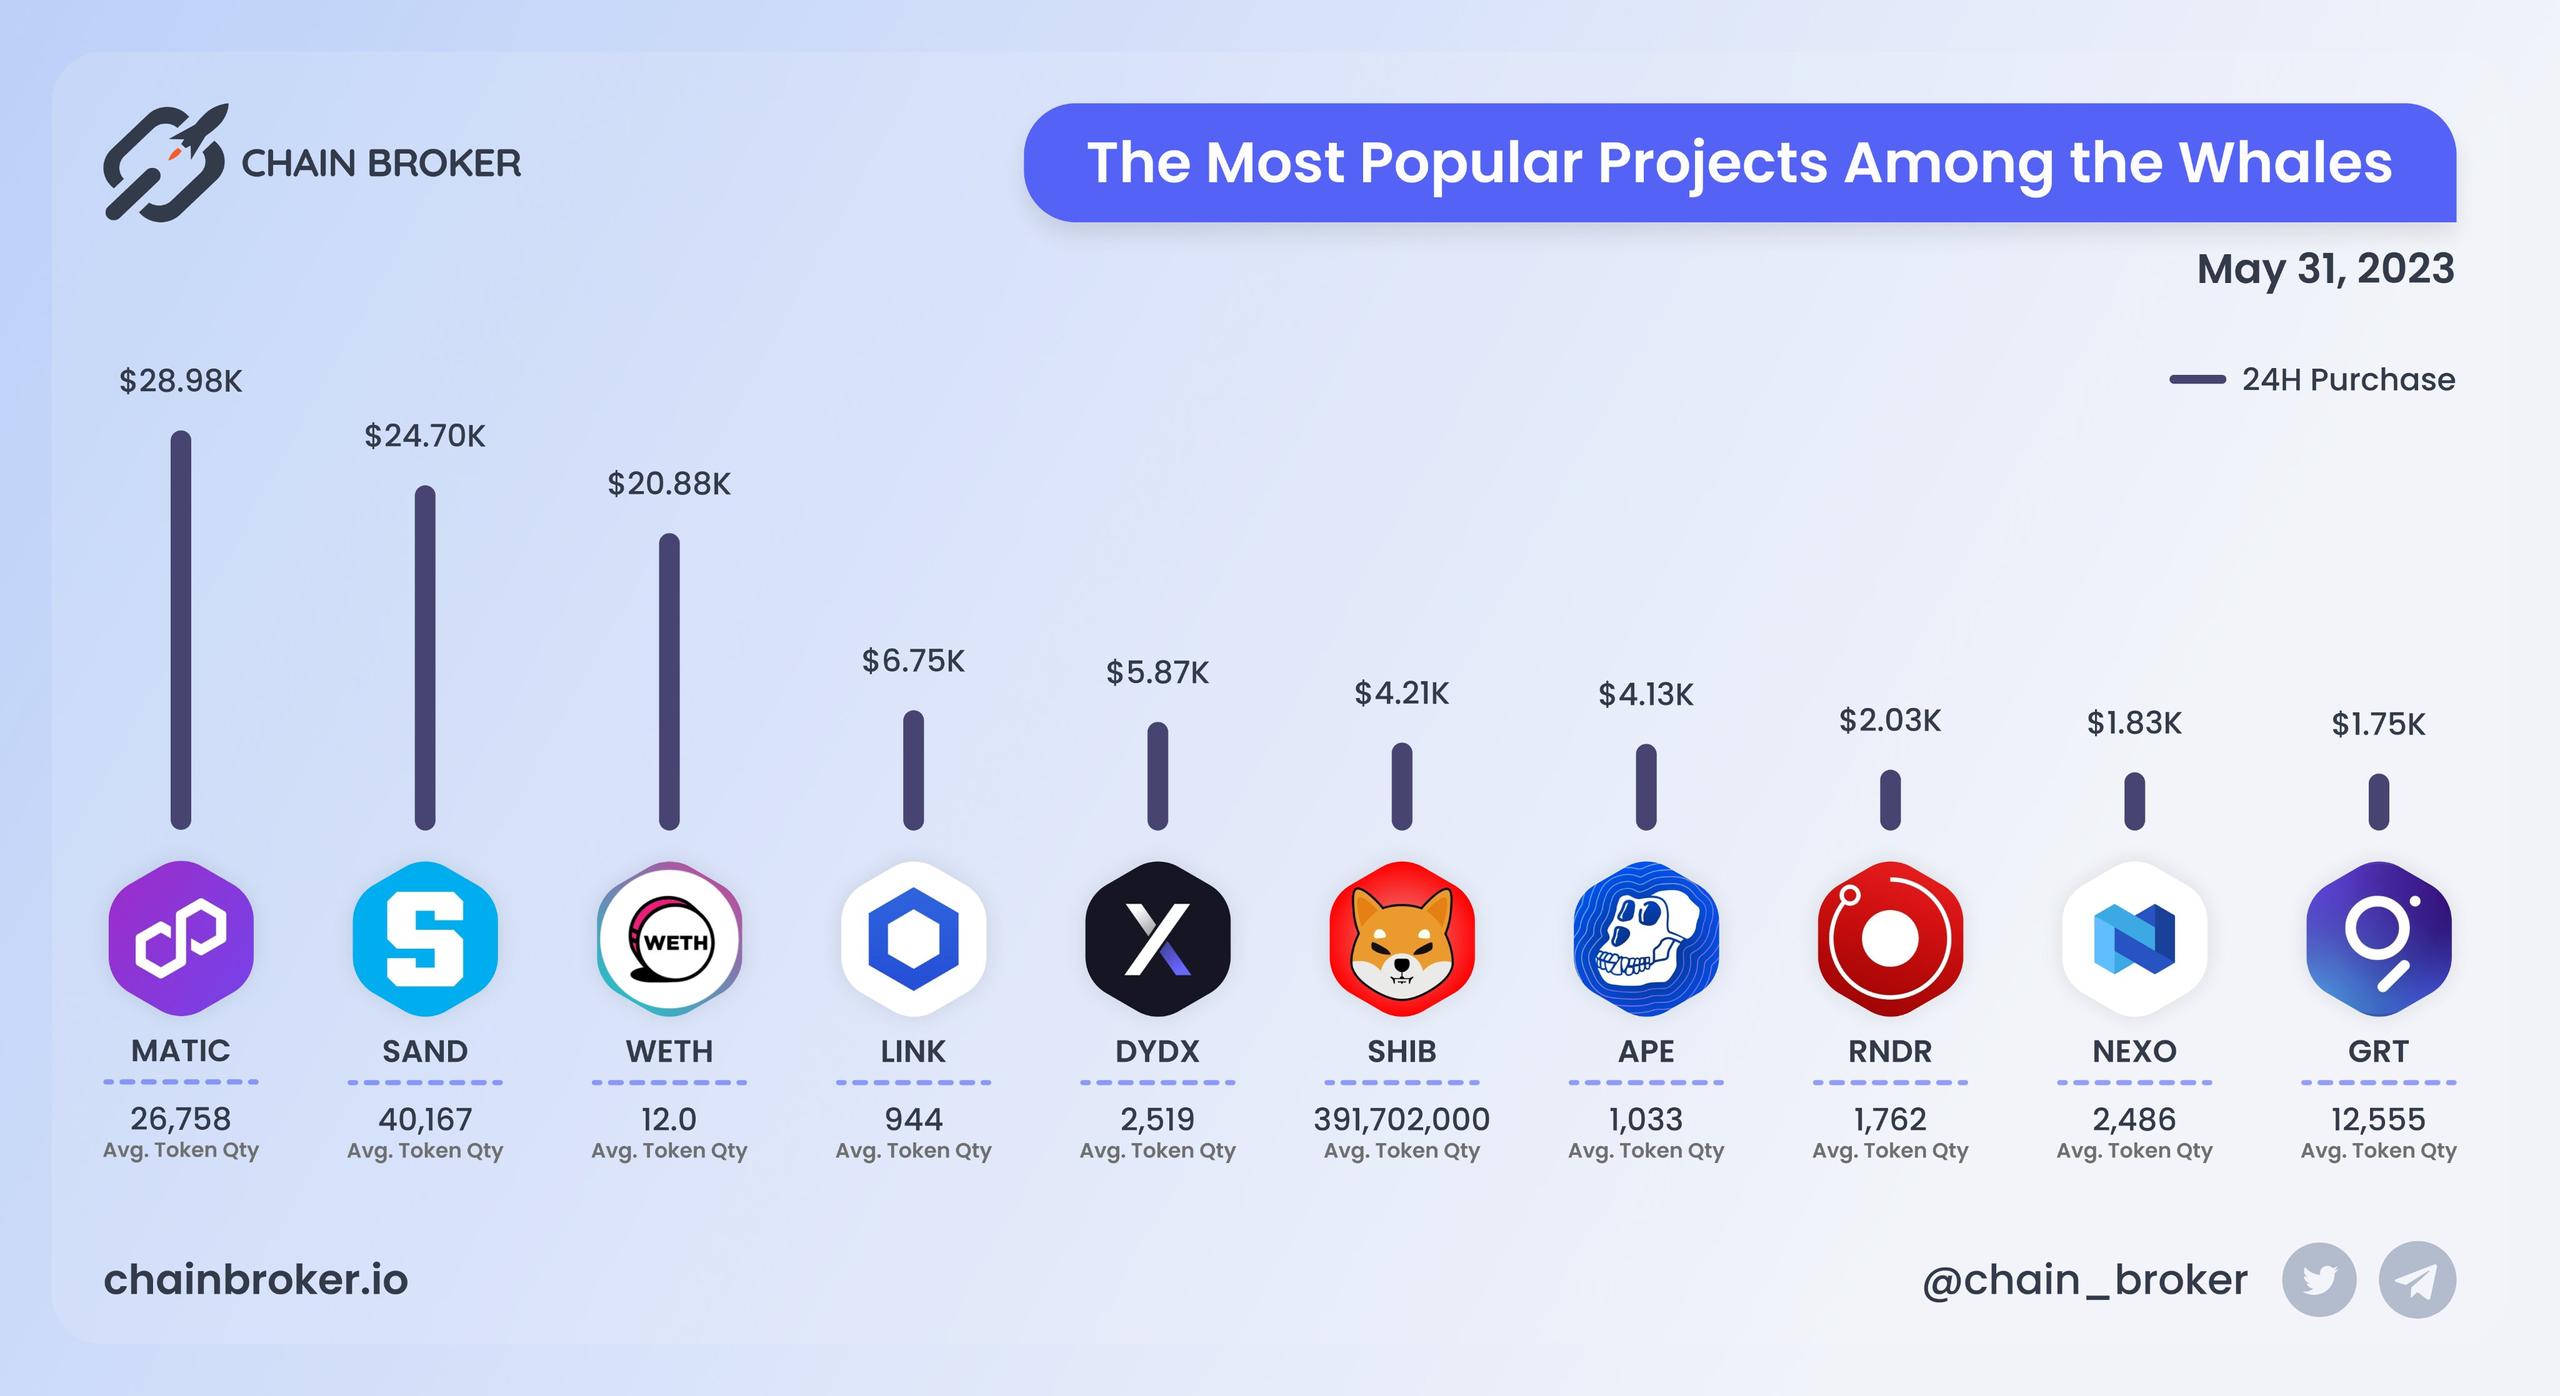 The most popular projects among whales